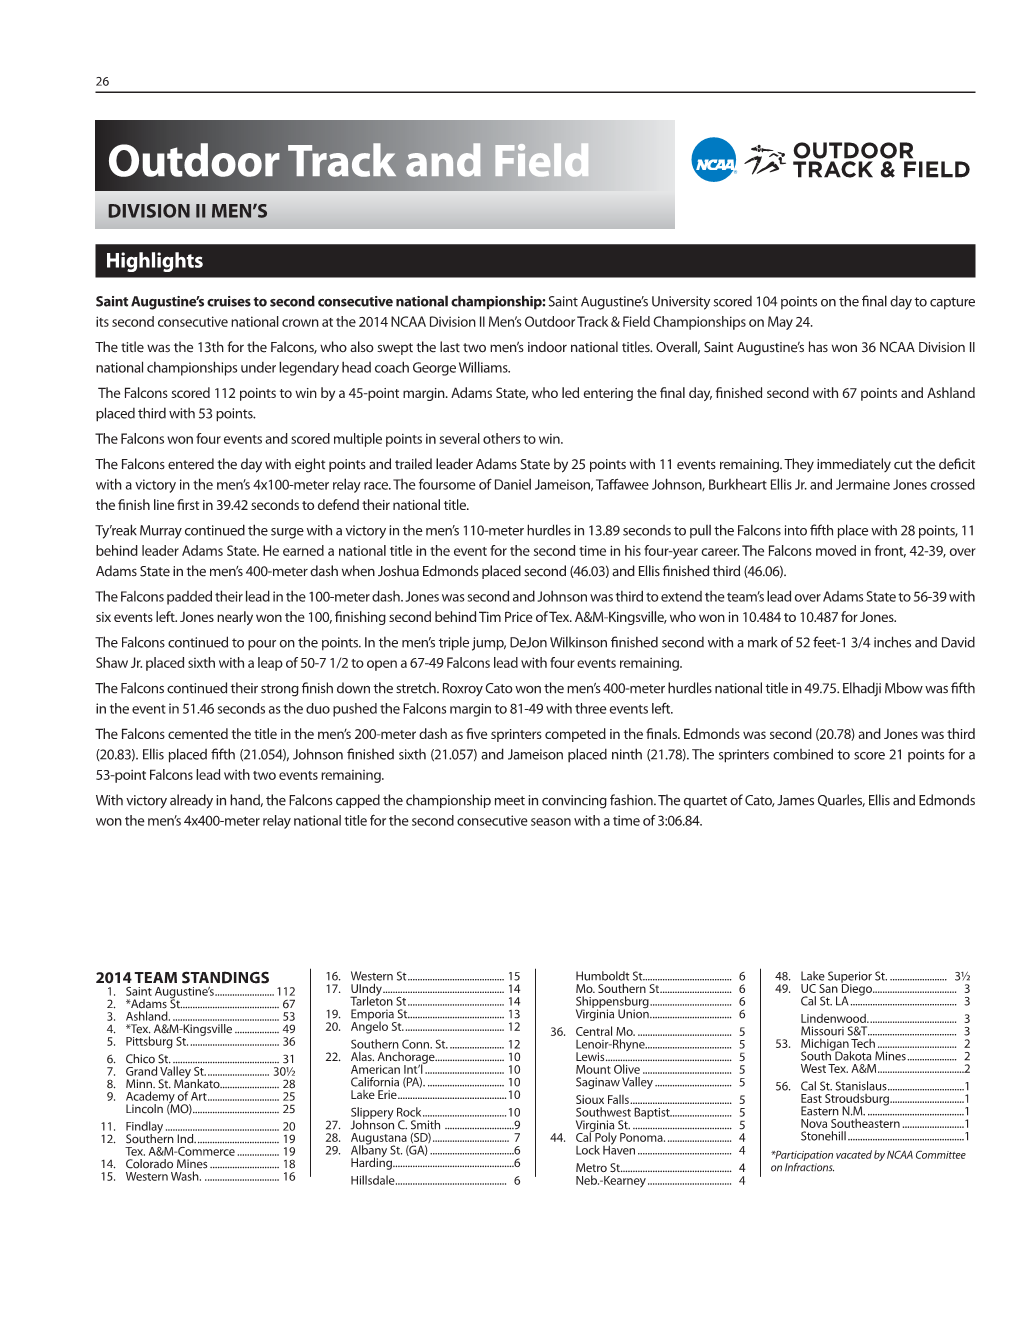 Outdoor Track and Field DIVISION II MEN’S